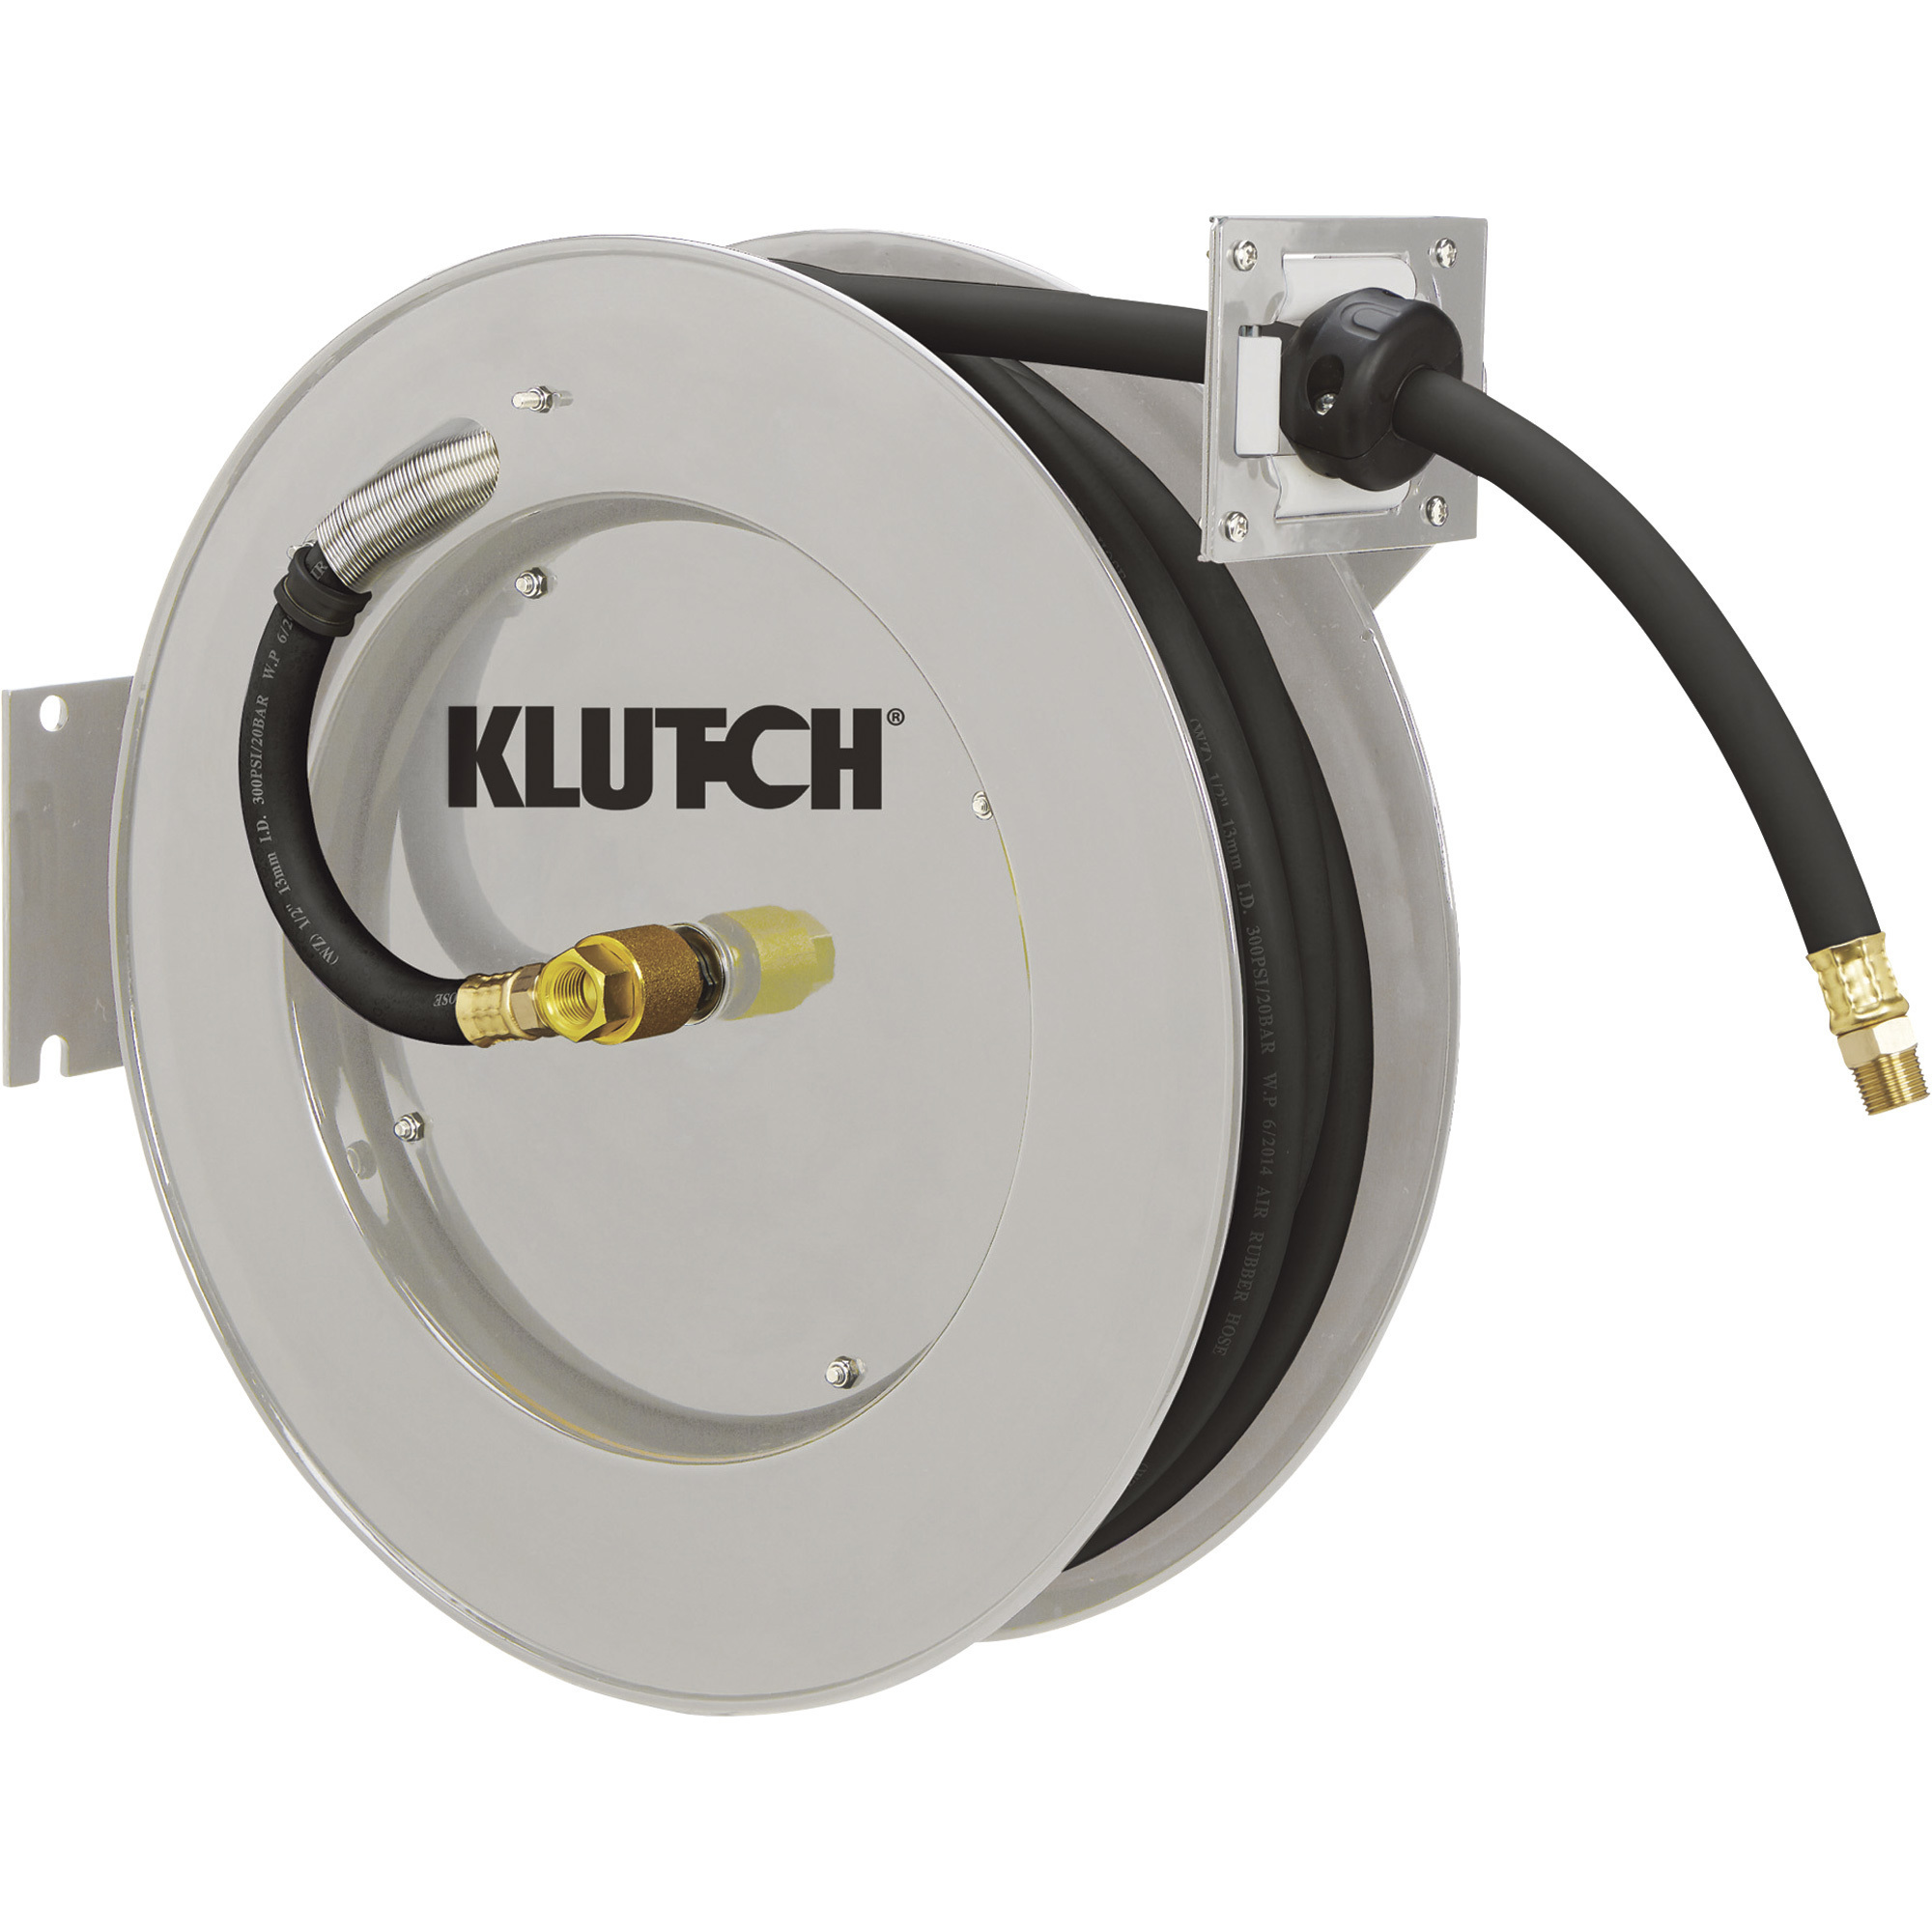 Klutch Heavy-Duty Auto Rewind Air Hose Reel, With 1/2in. x 50ft. Rubber Hose,  Max. 300 PSI